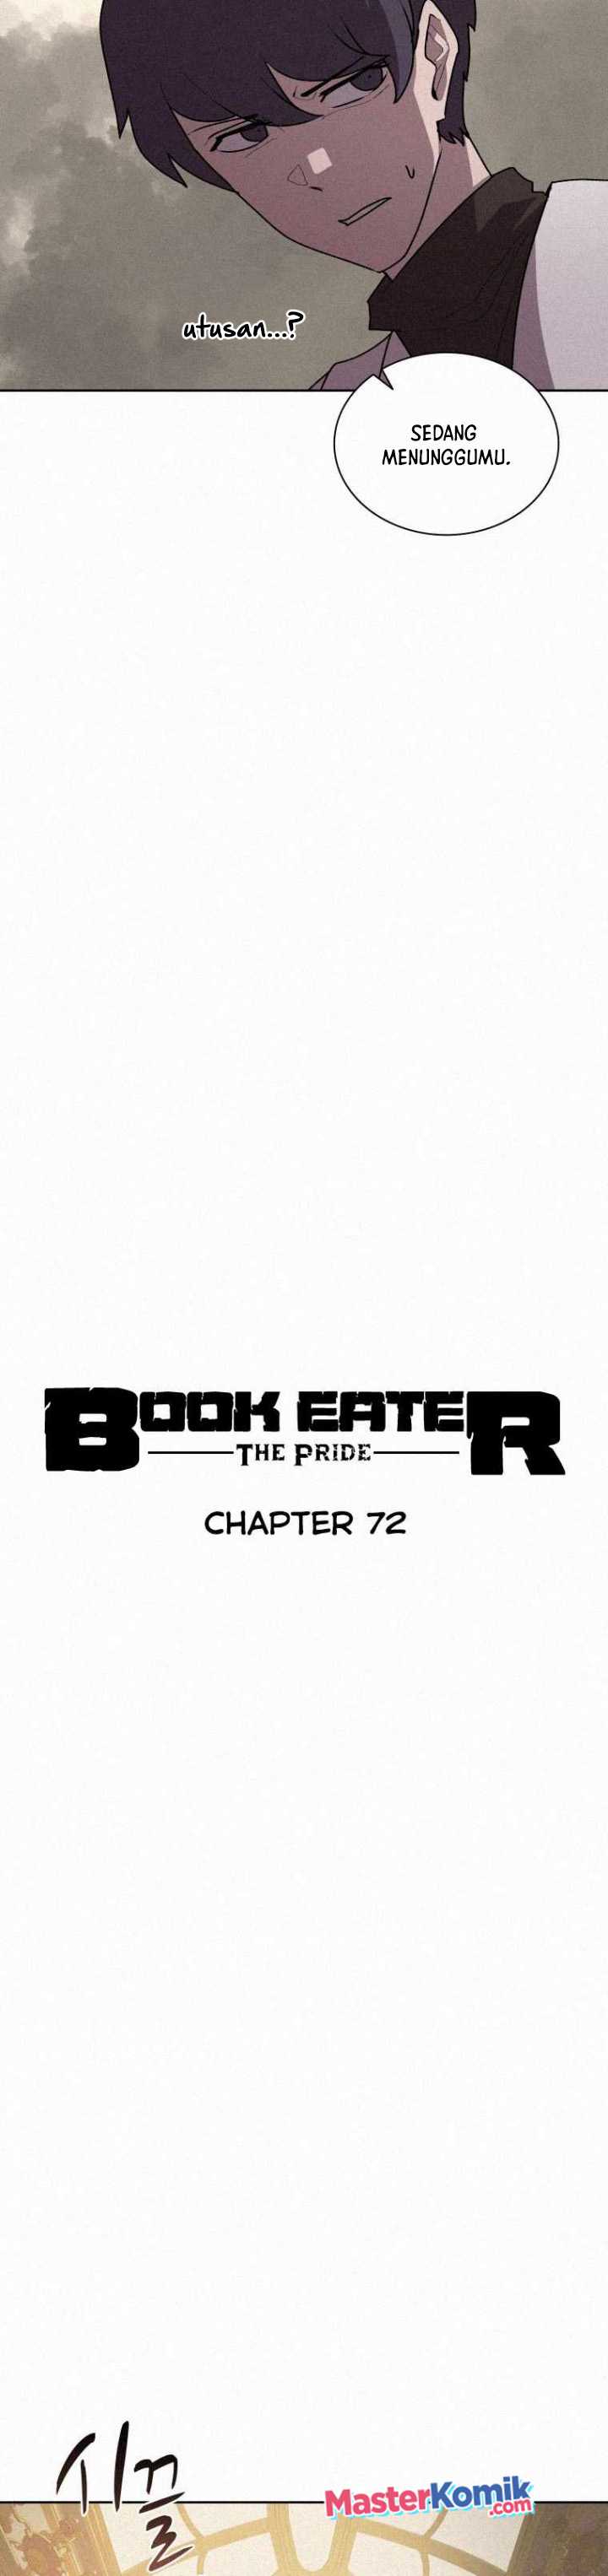 The Book Eating Magician (Book Eater) Chapter 72